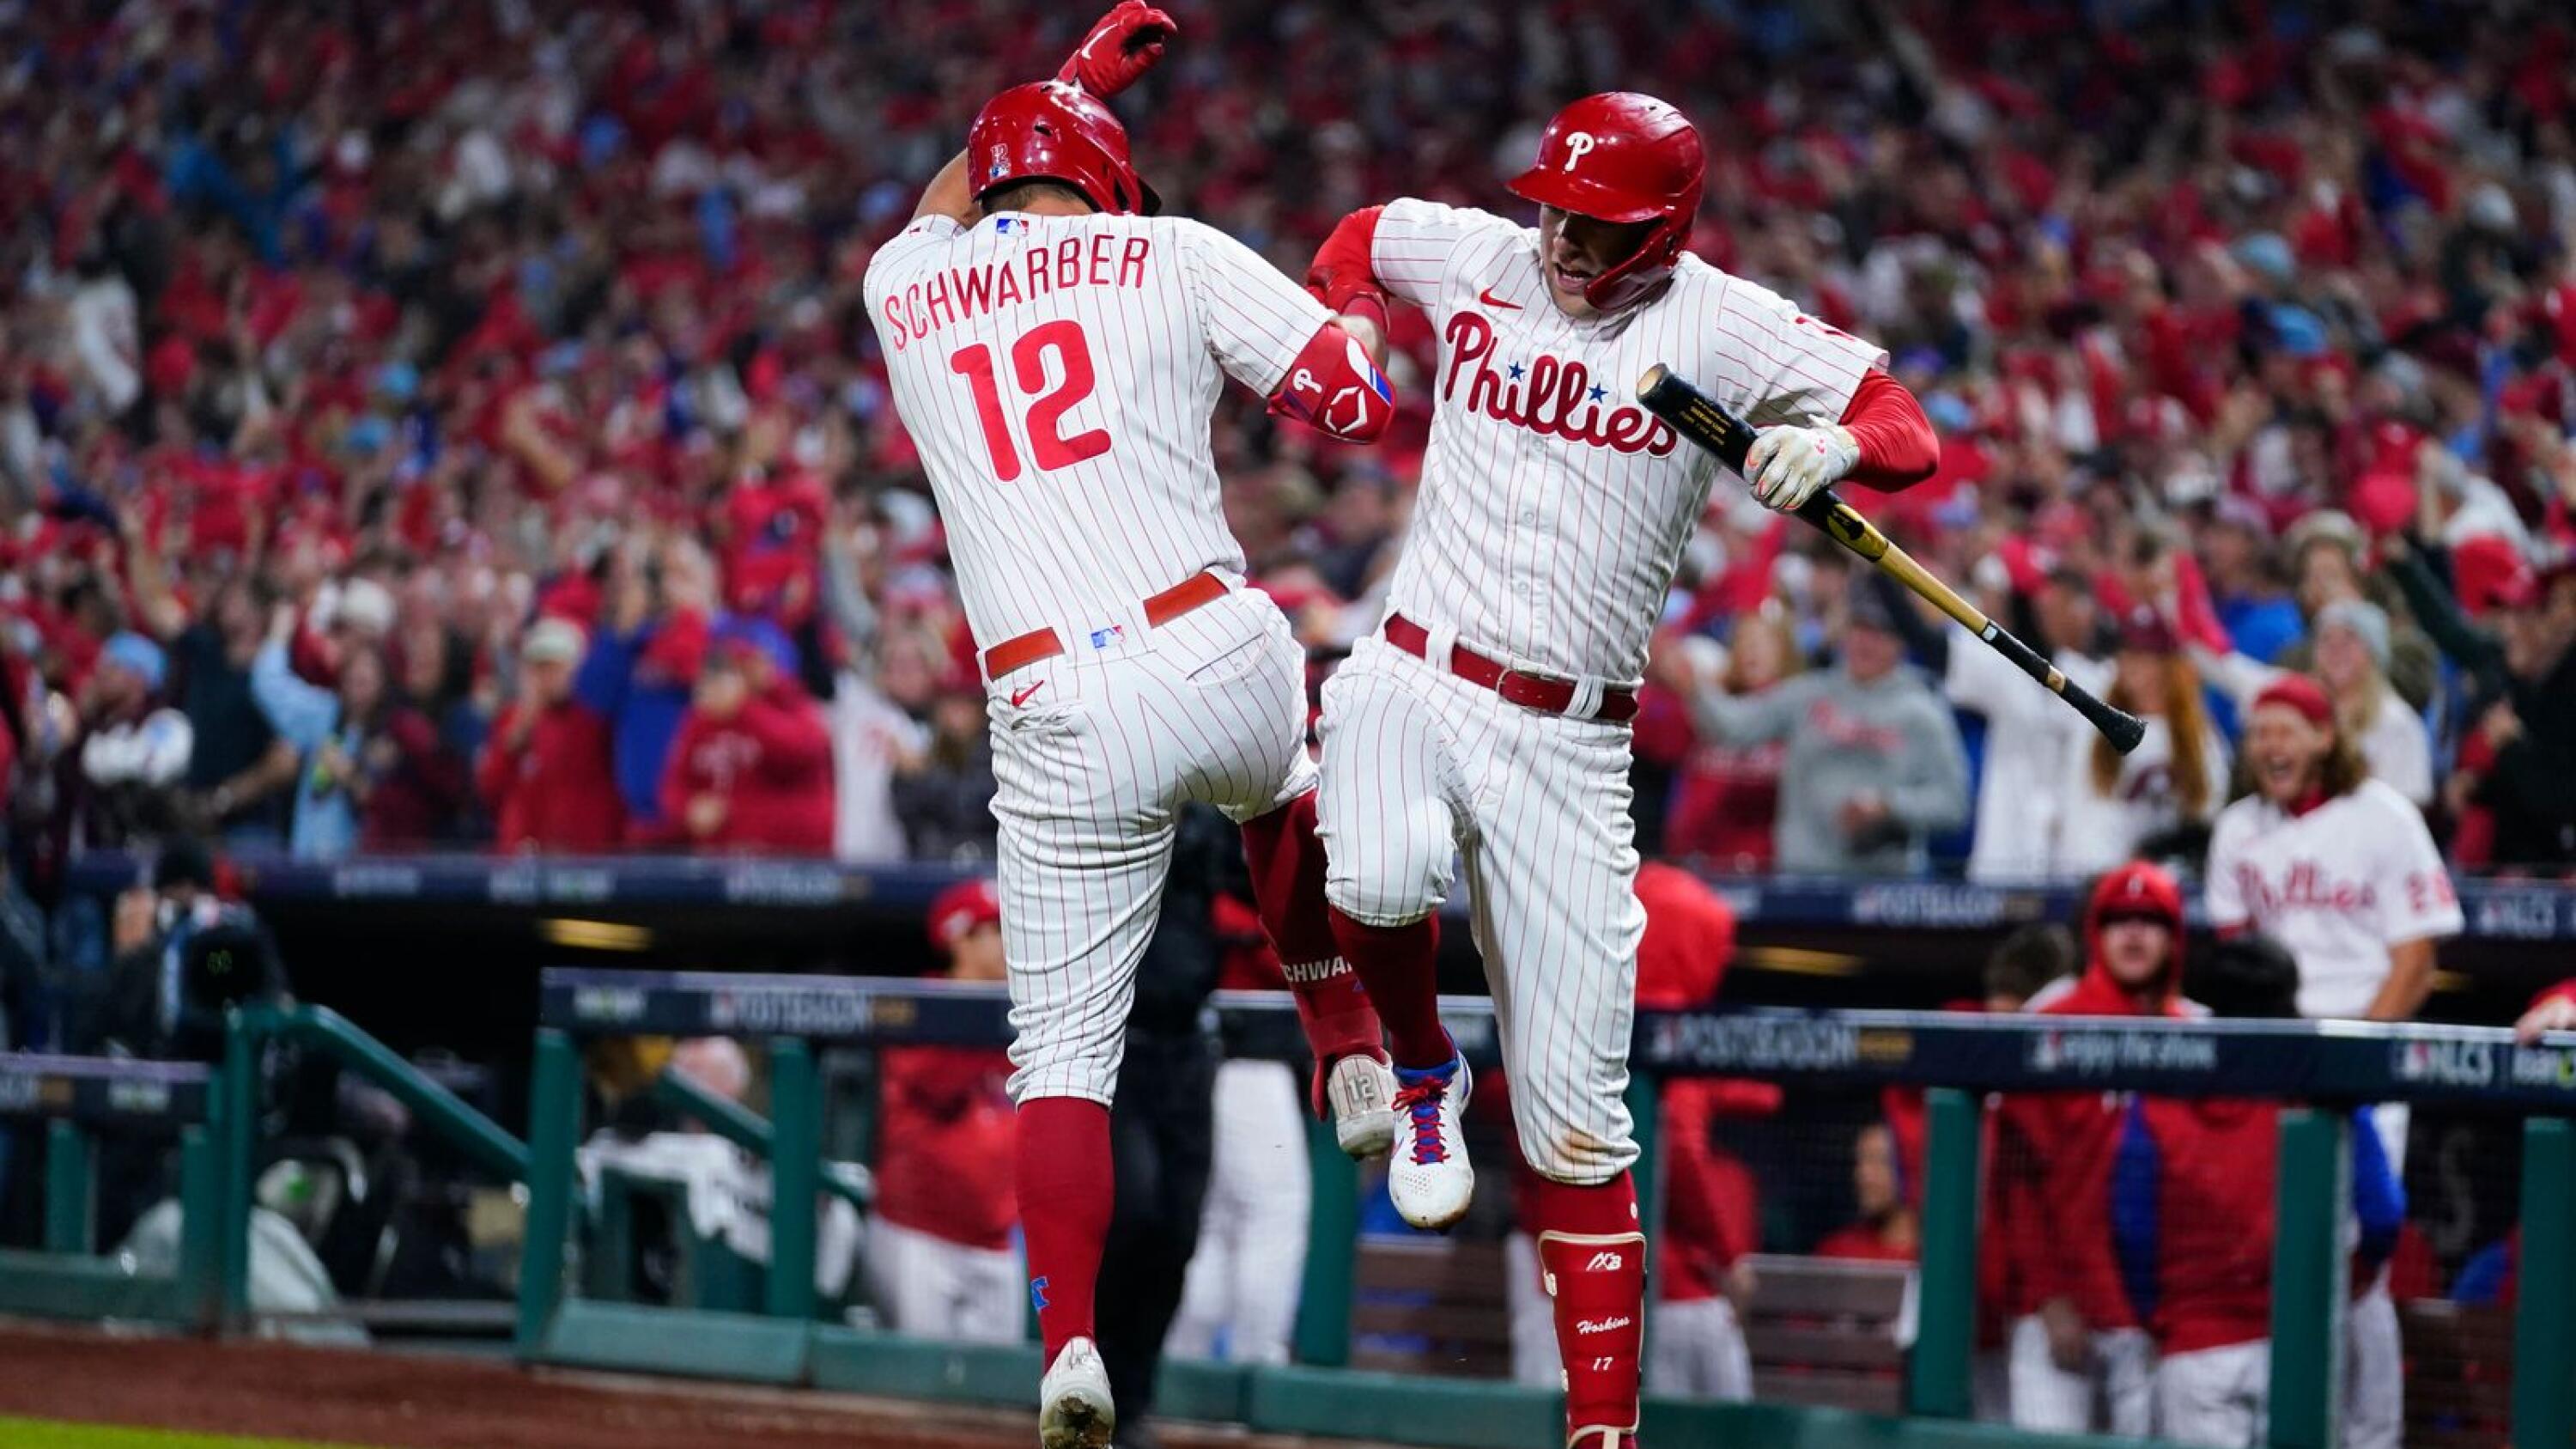 WATCH: Phillies sing “Dancing on My Own” after NLCS victory